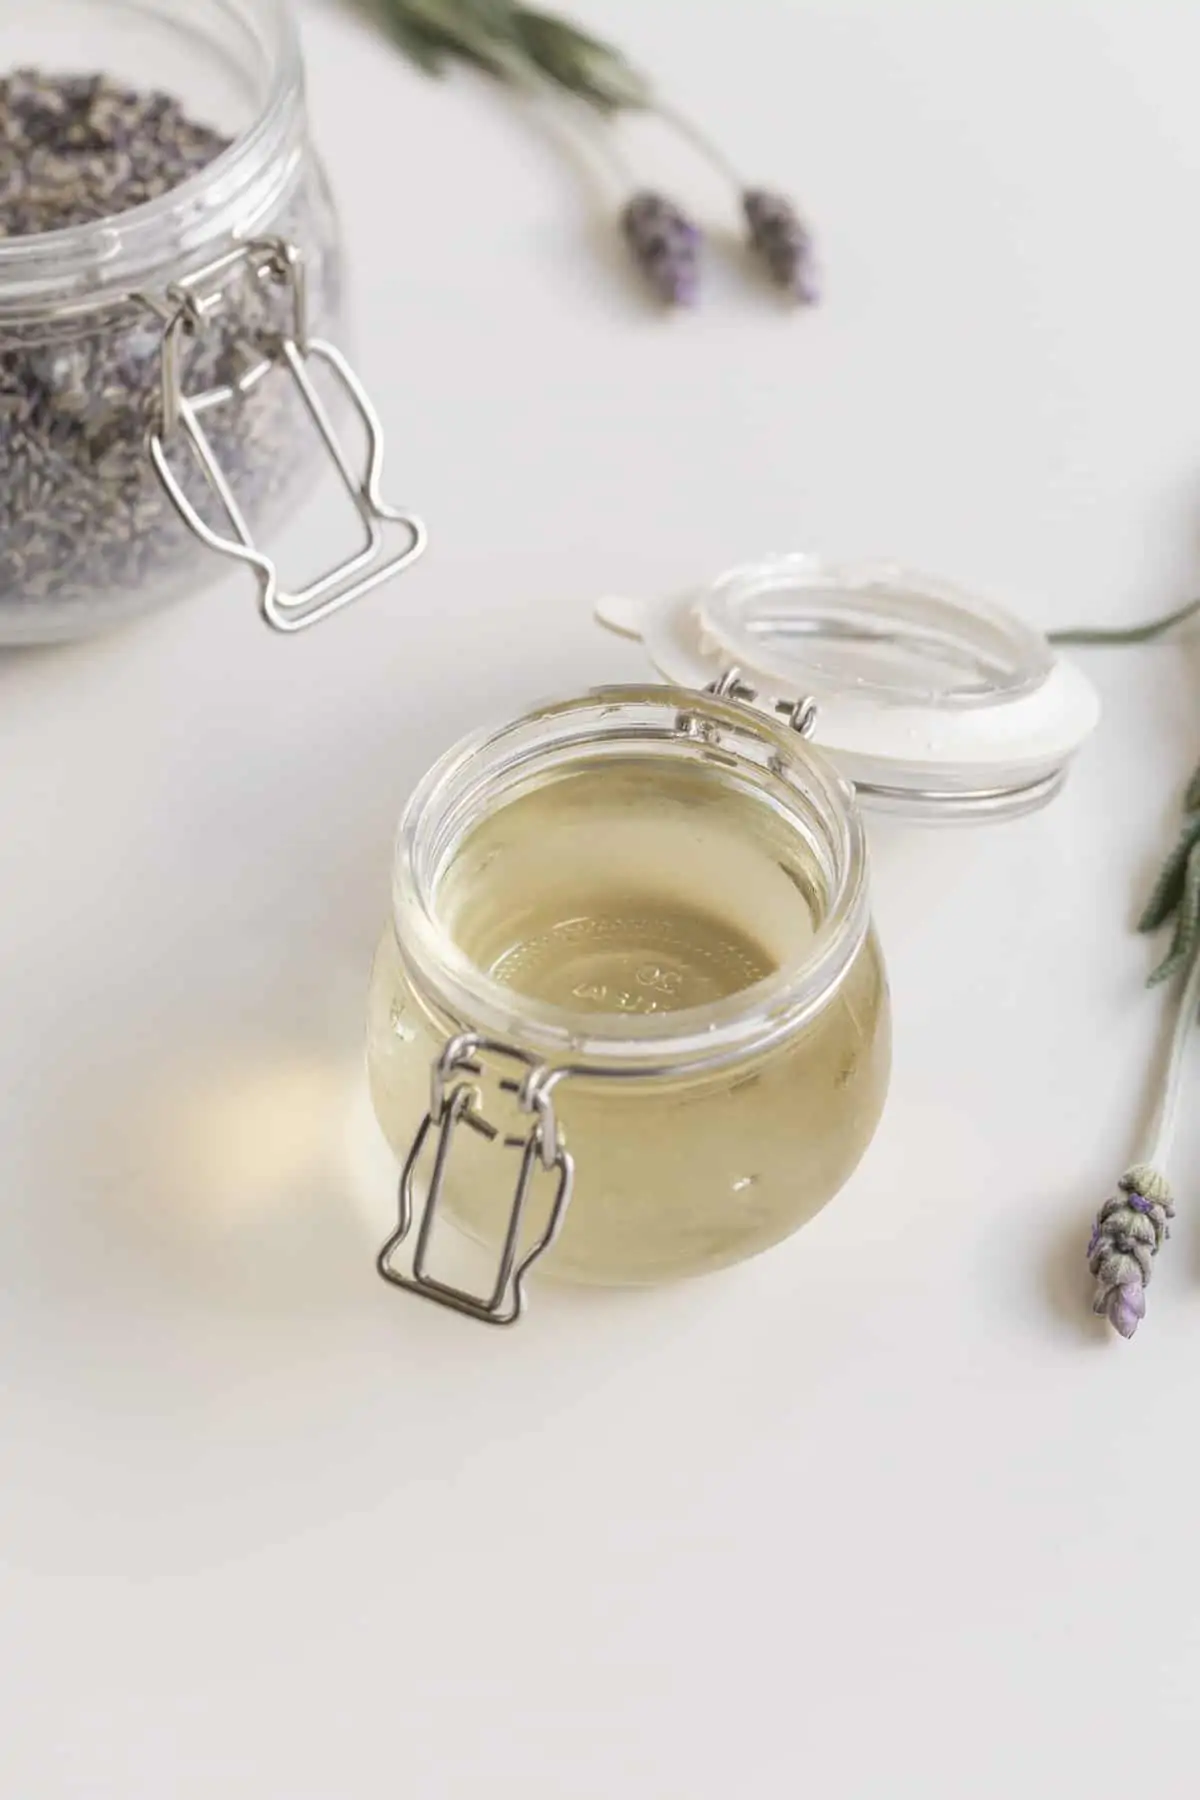 Lavender simple syrup in a jar with lavender jar and lavender flowers